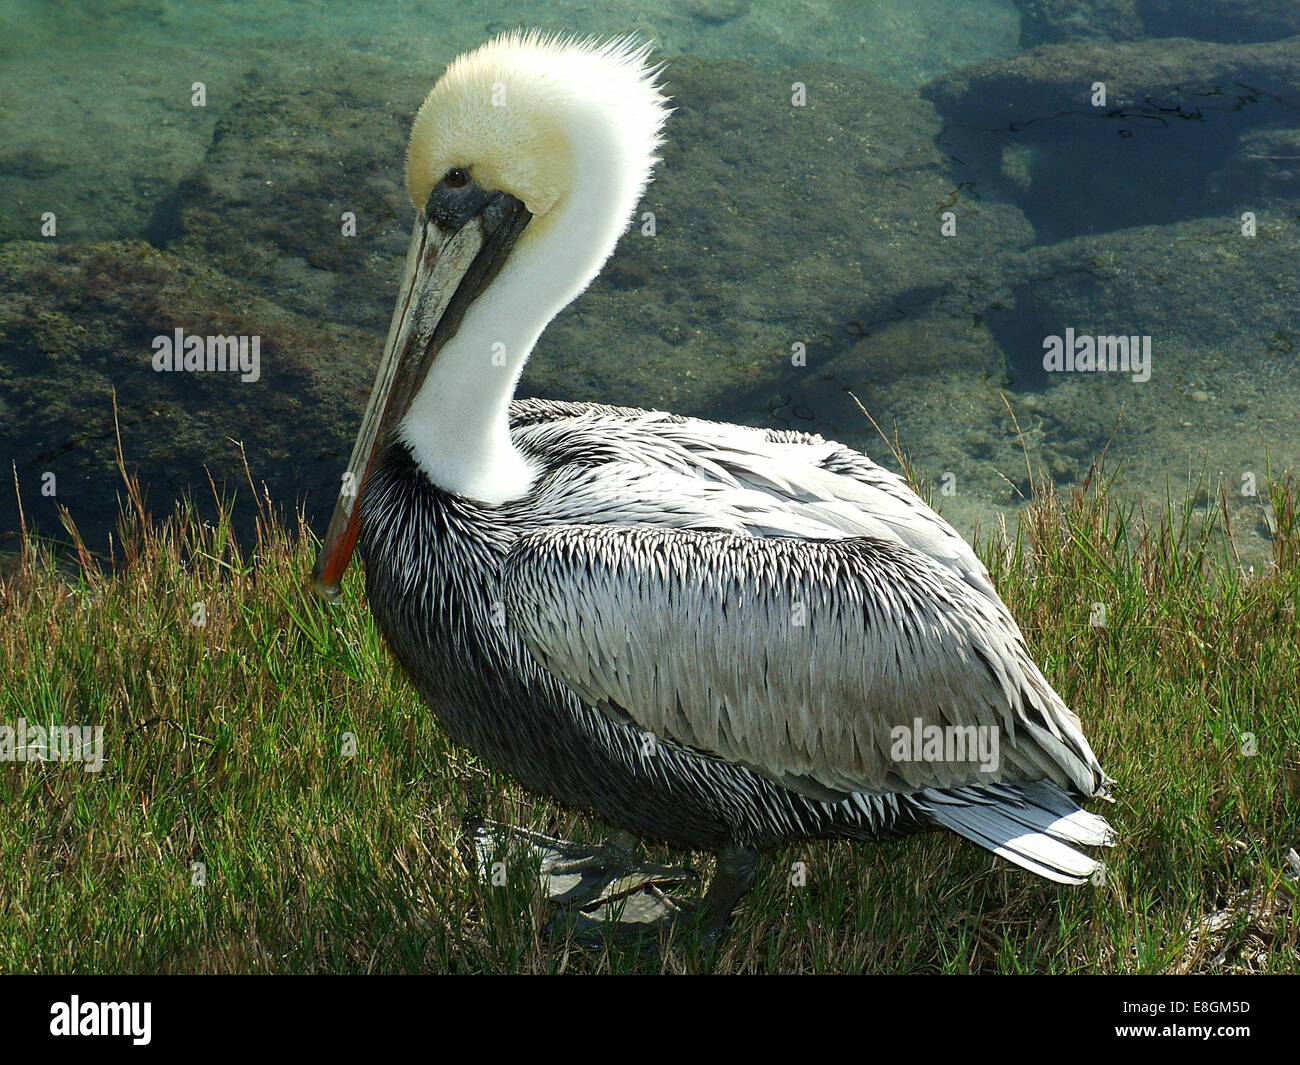 USA, Florida, St. Johns County, St. Augustine, Brown Pelican sitting in grass Stock Photo